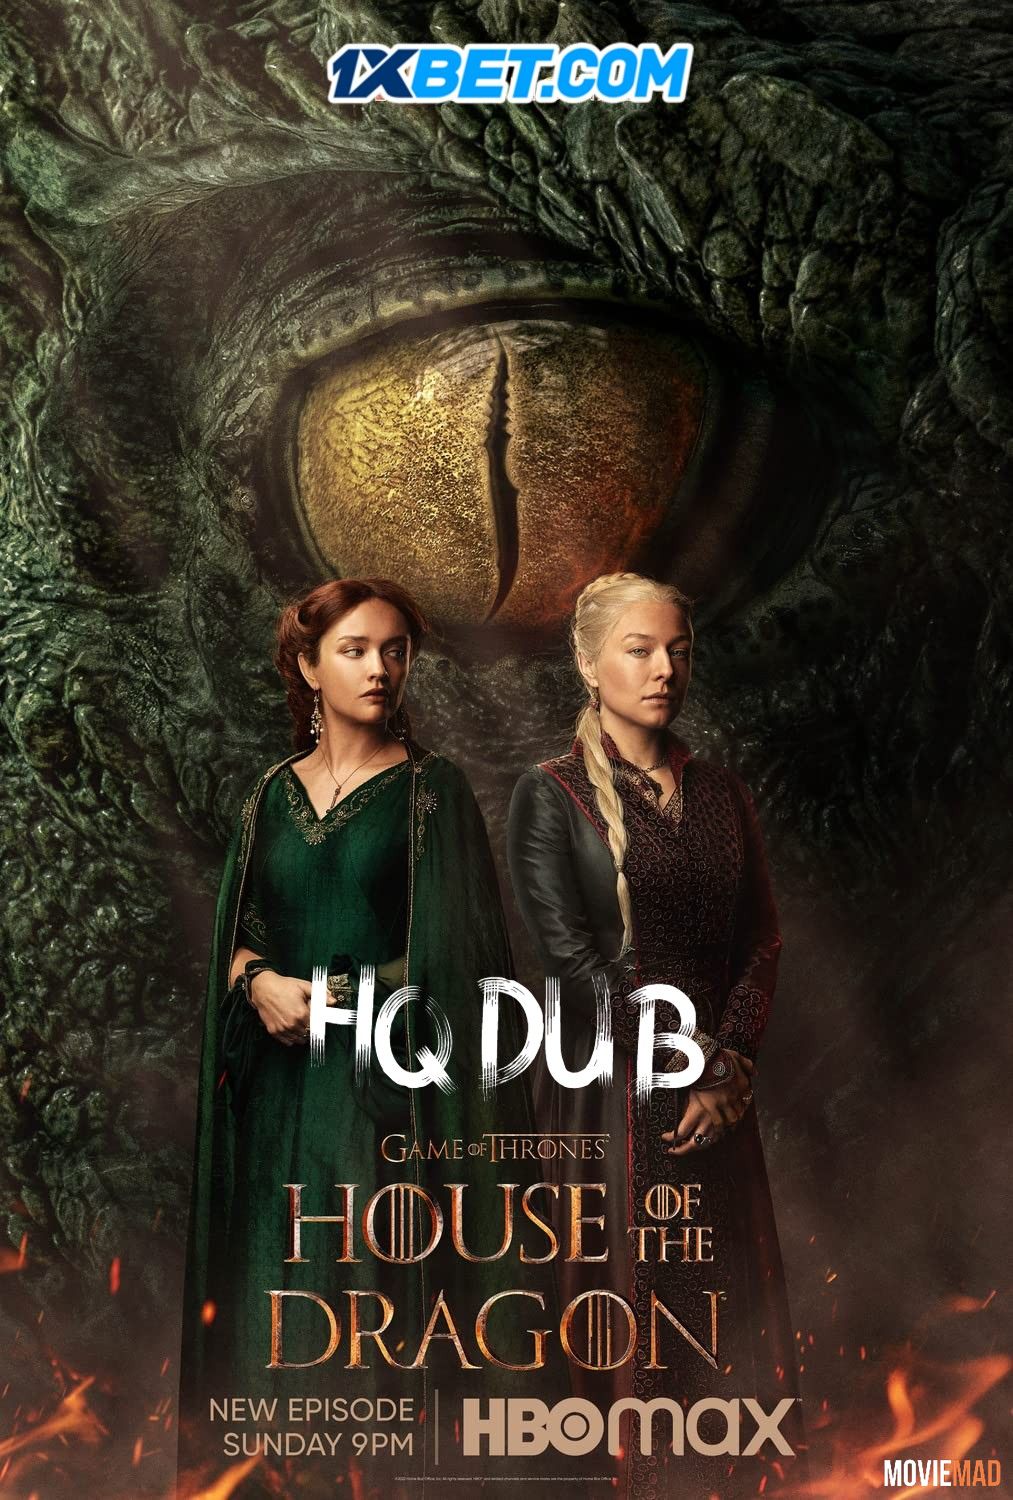 House Of The Dragon S01E10 (2022) Hindi (Voice Over) Dubbed HBOMAX HDRip 1080p 720p 480p